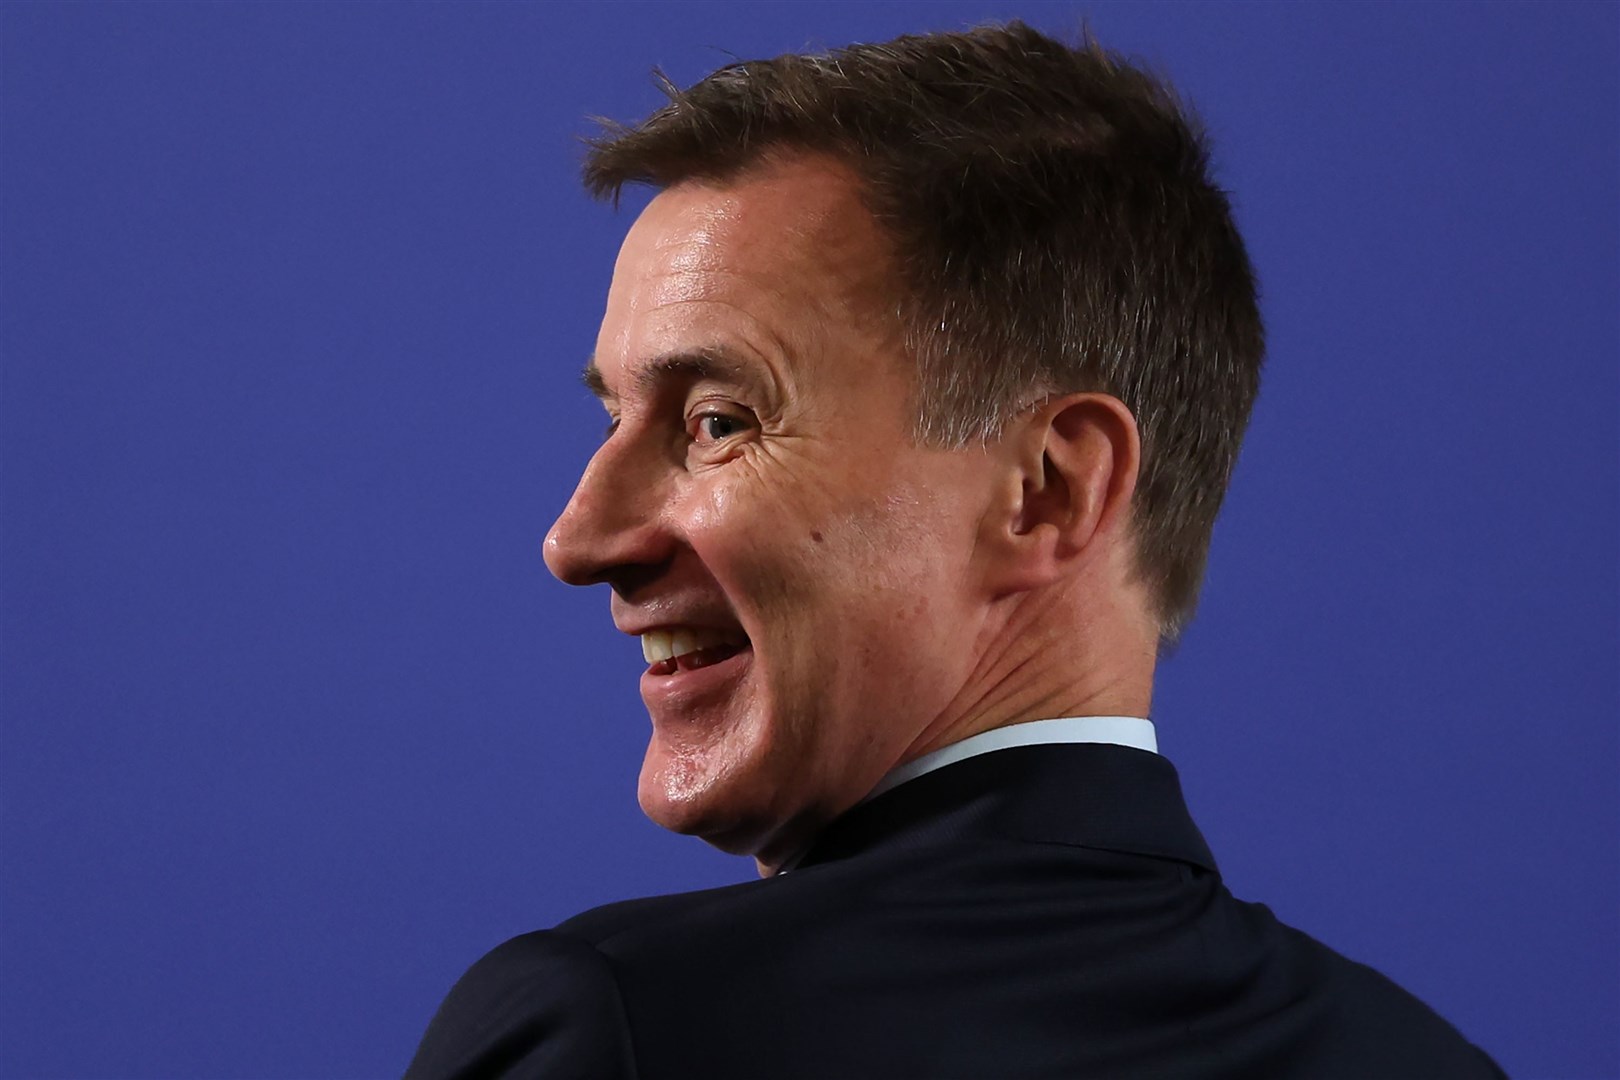 Chancellor of the Exchequer Jeremy Hunt was in the audience for Rishi Sunak’s speech (Daniel Leal/PA)